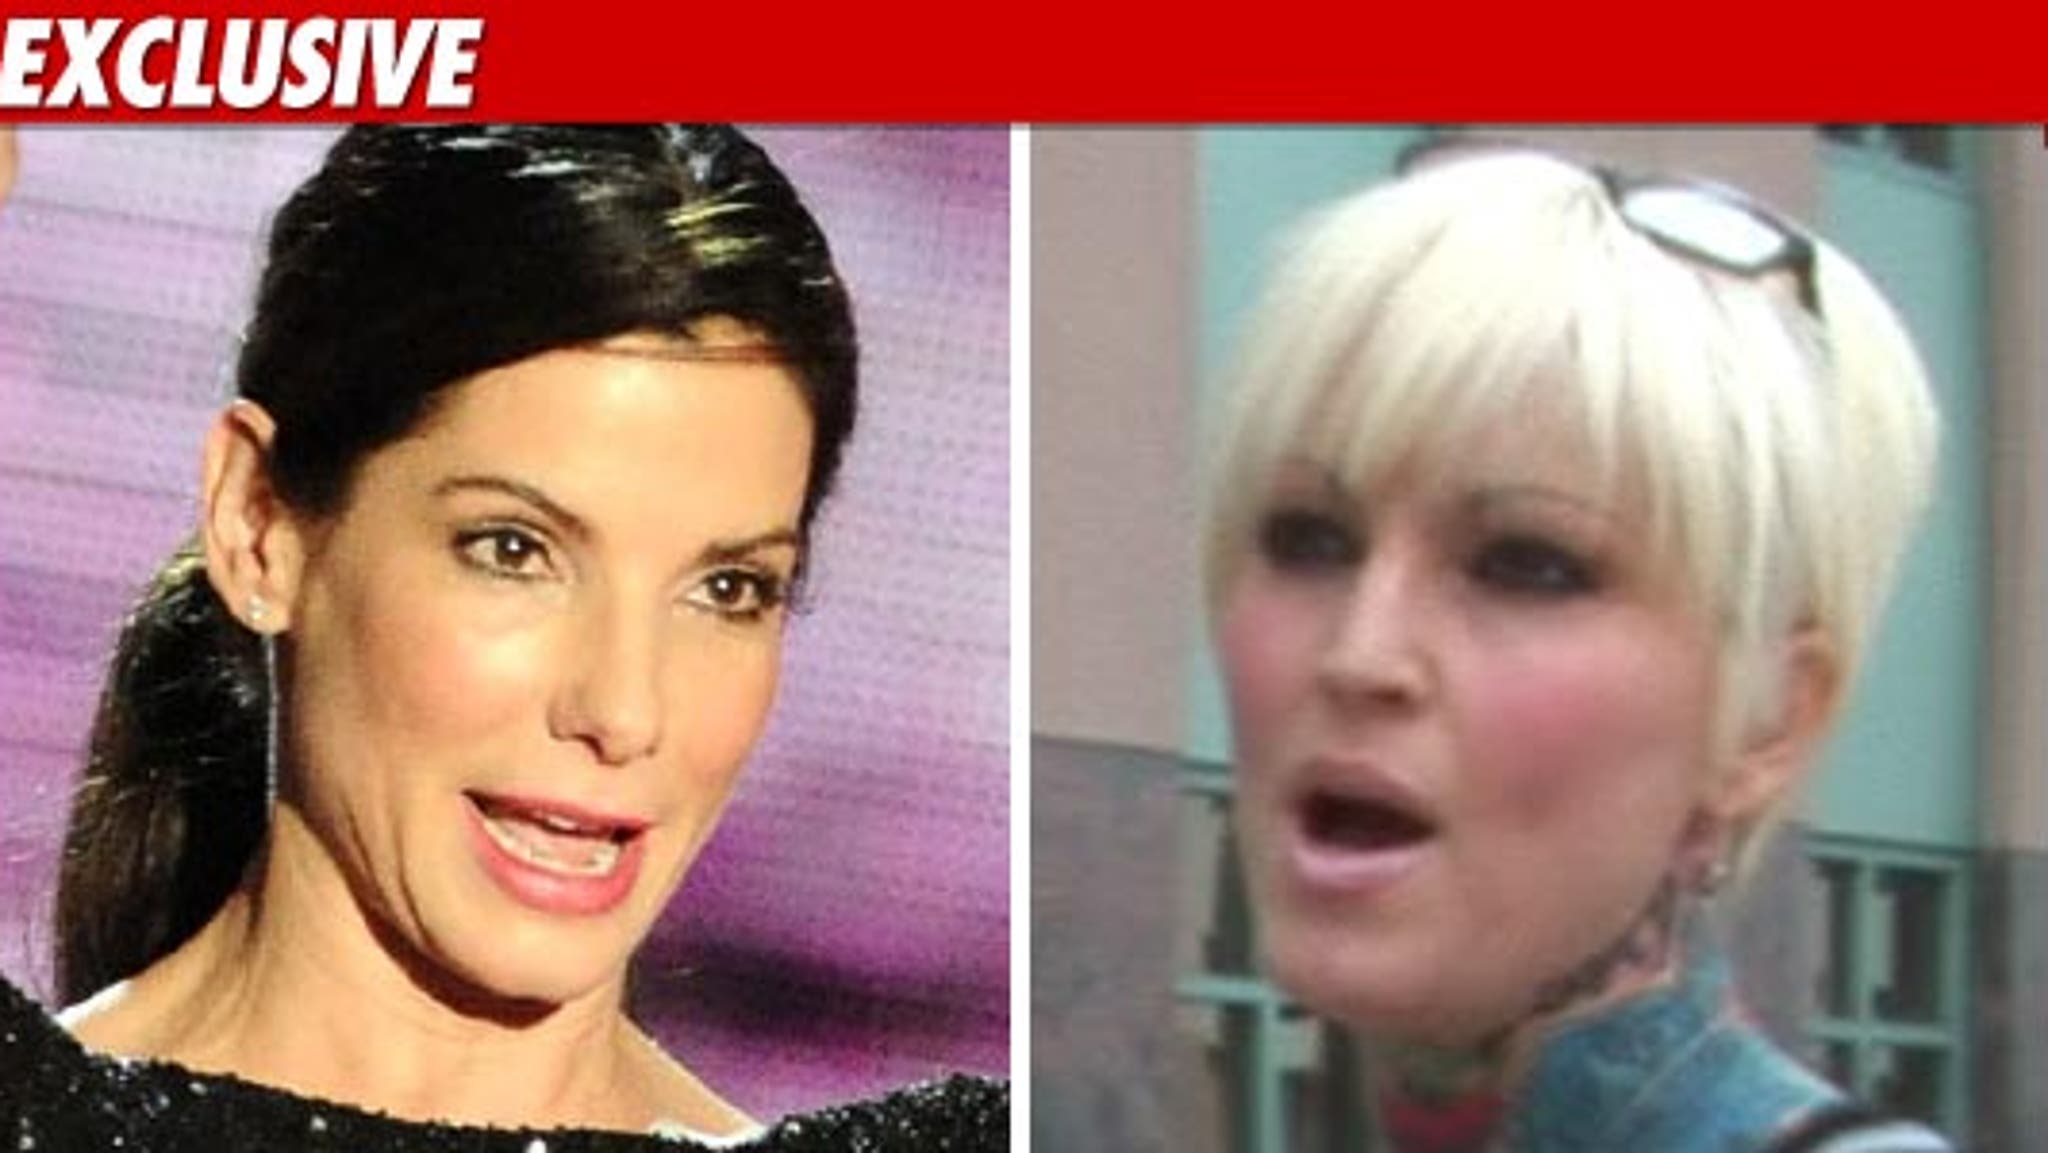 Sandra Bullock and Jesse James Ex-Wife -- The Alleged Confrontation photo